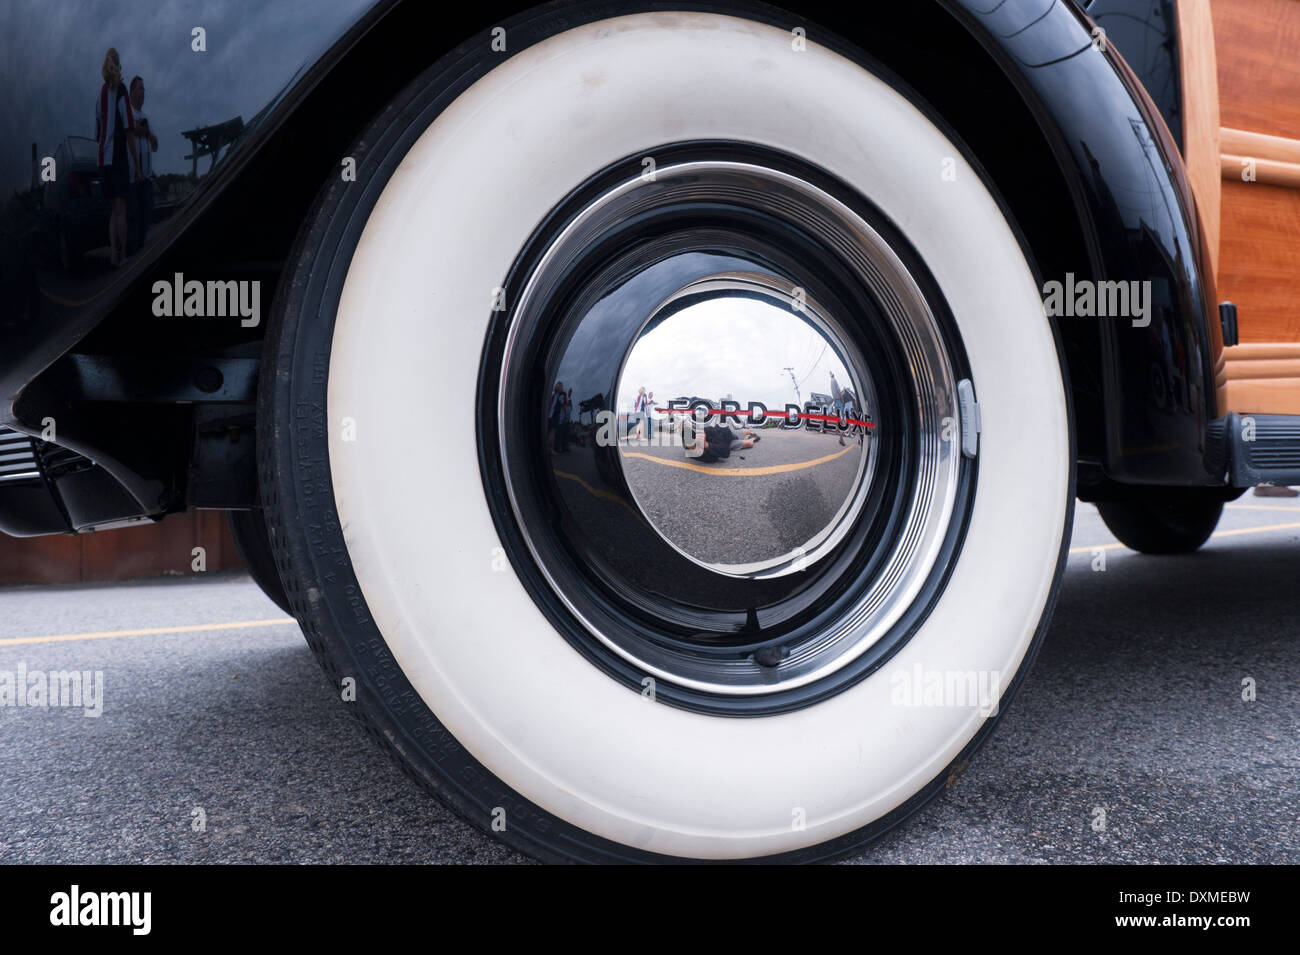 closeup-of-a-white-wall-tire-on-a-ford-deluxe-woodie-station-wagon-DXMEBW.jpg